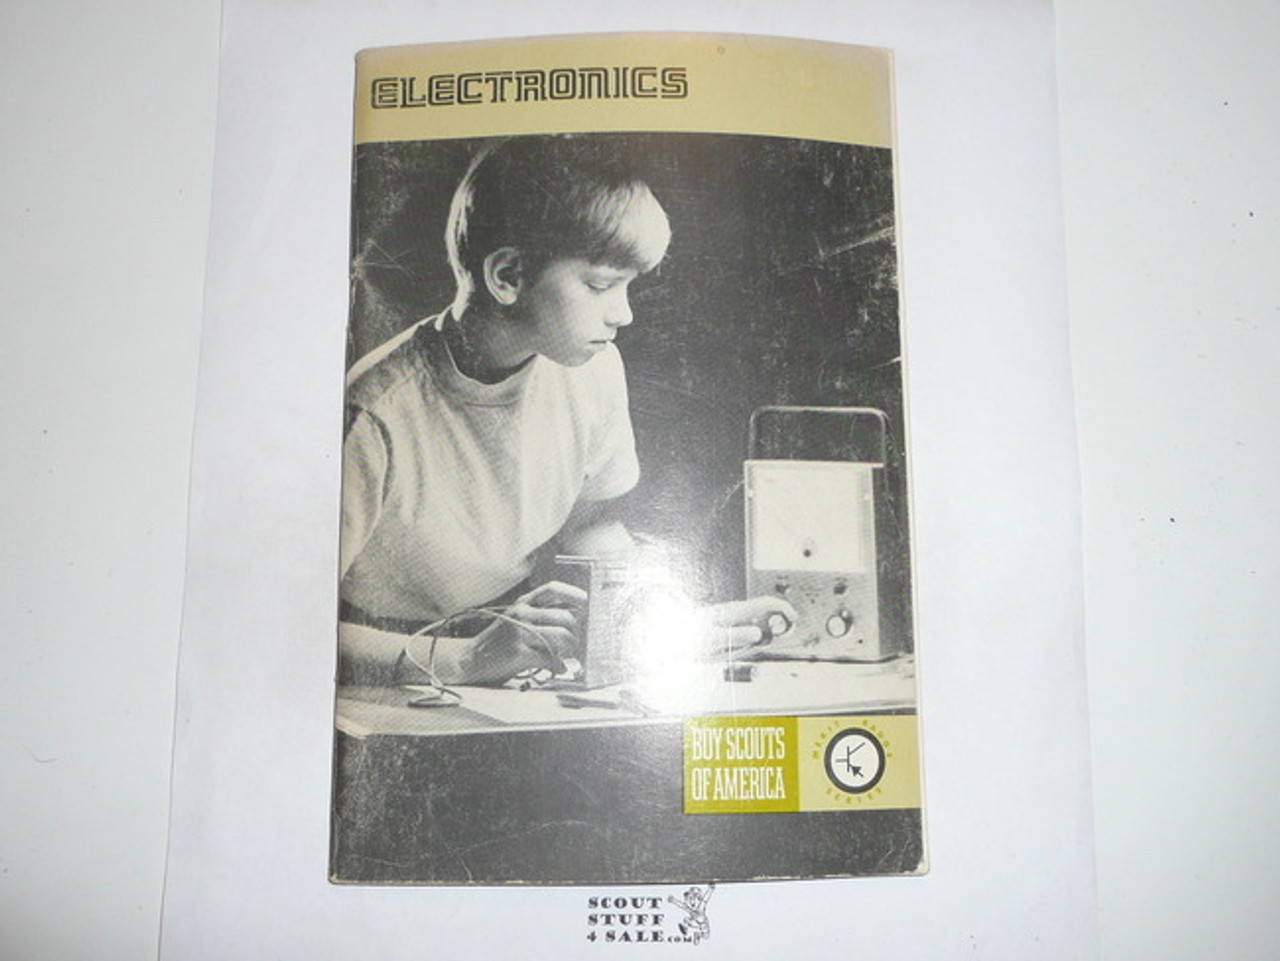 Electronics Merit Badge Pamphlet, Type 8, Green Band Cover, 4-79 Printing